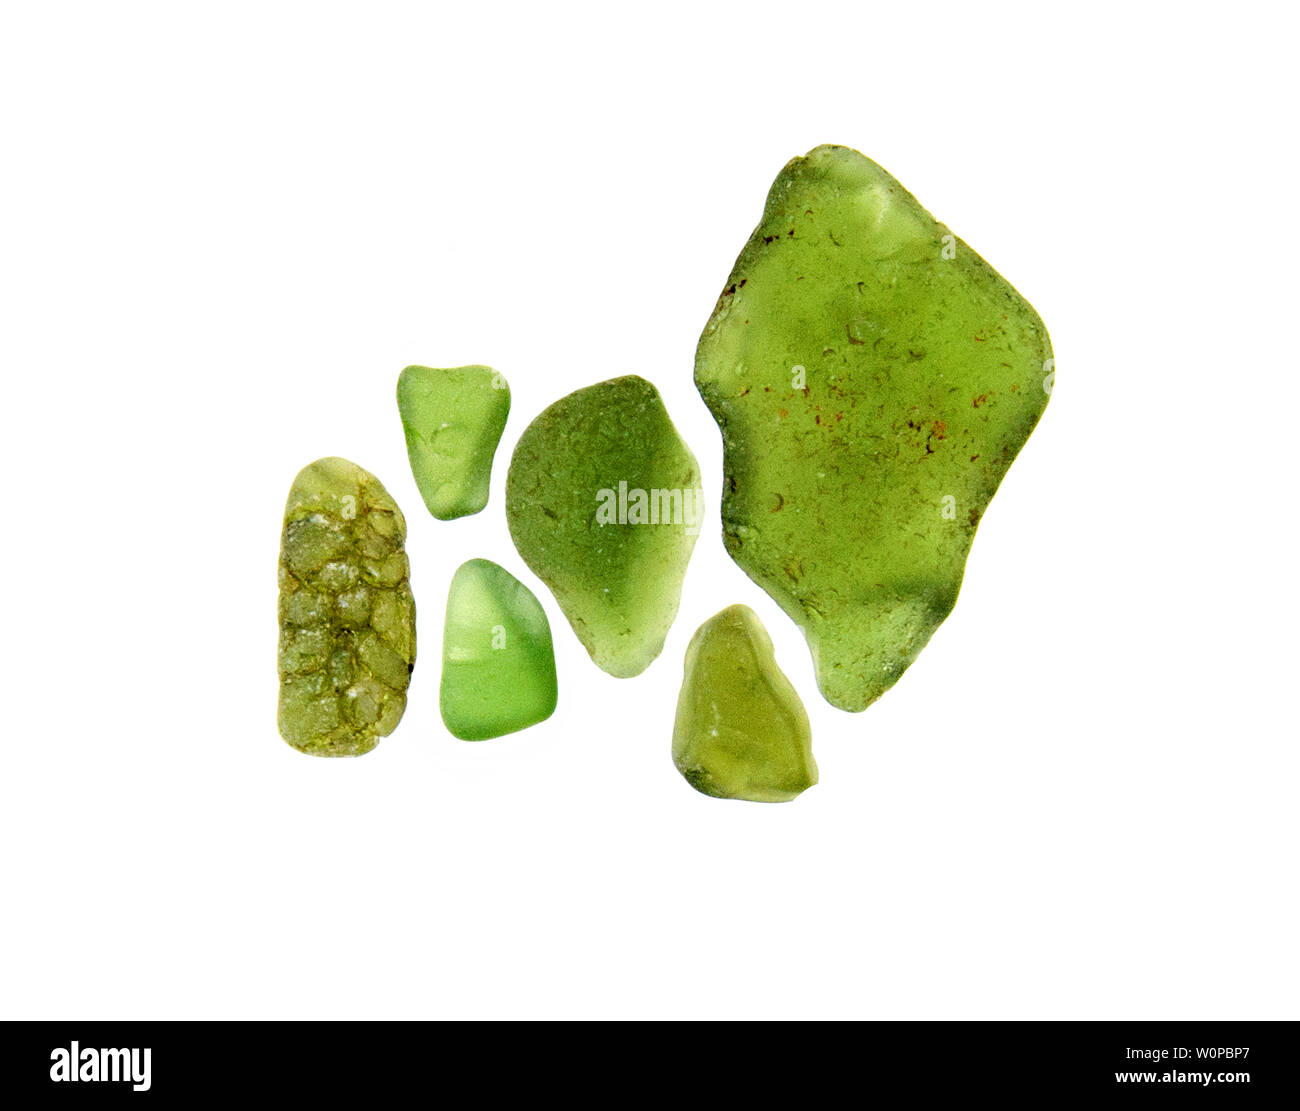 Green sea glass photographed on a light box with white background. Stock Photo